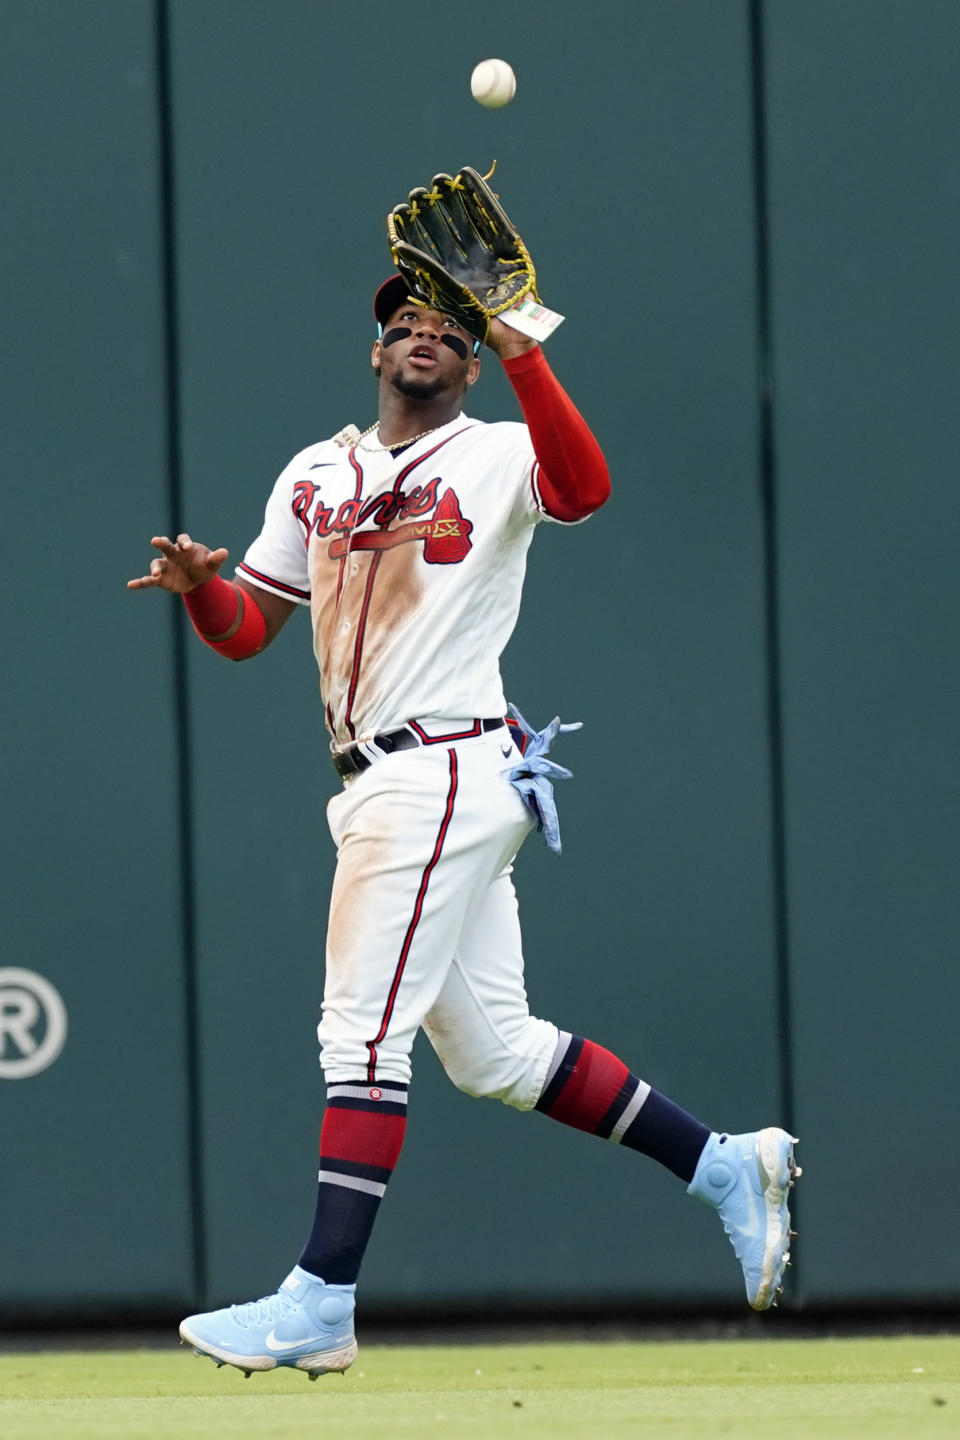 Atlanta Braves right fielder Ronald Acuna Jr. (13) catches a fly ball from New York Mets' Tomas Nido in the eighth inning of a baseball game, Wednesday, July 13, 2022, in Atlanta. (AP Photo/John Bazemore)